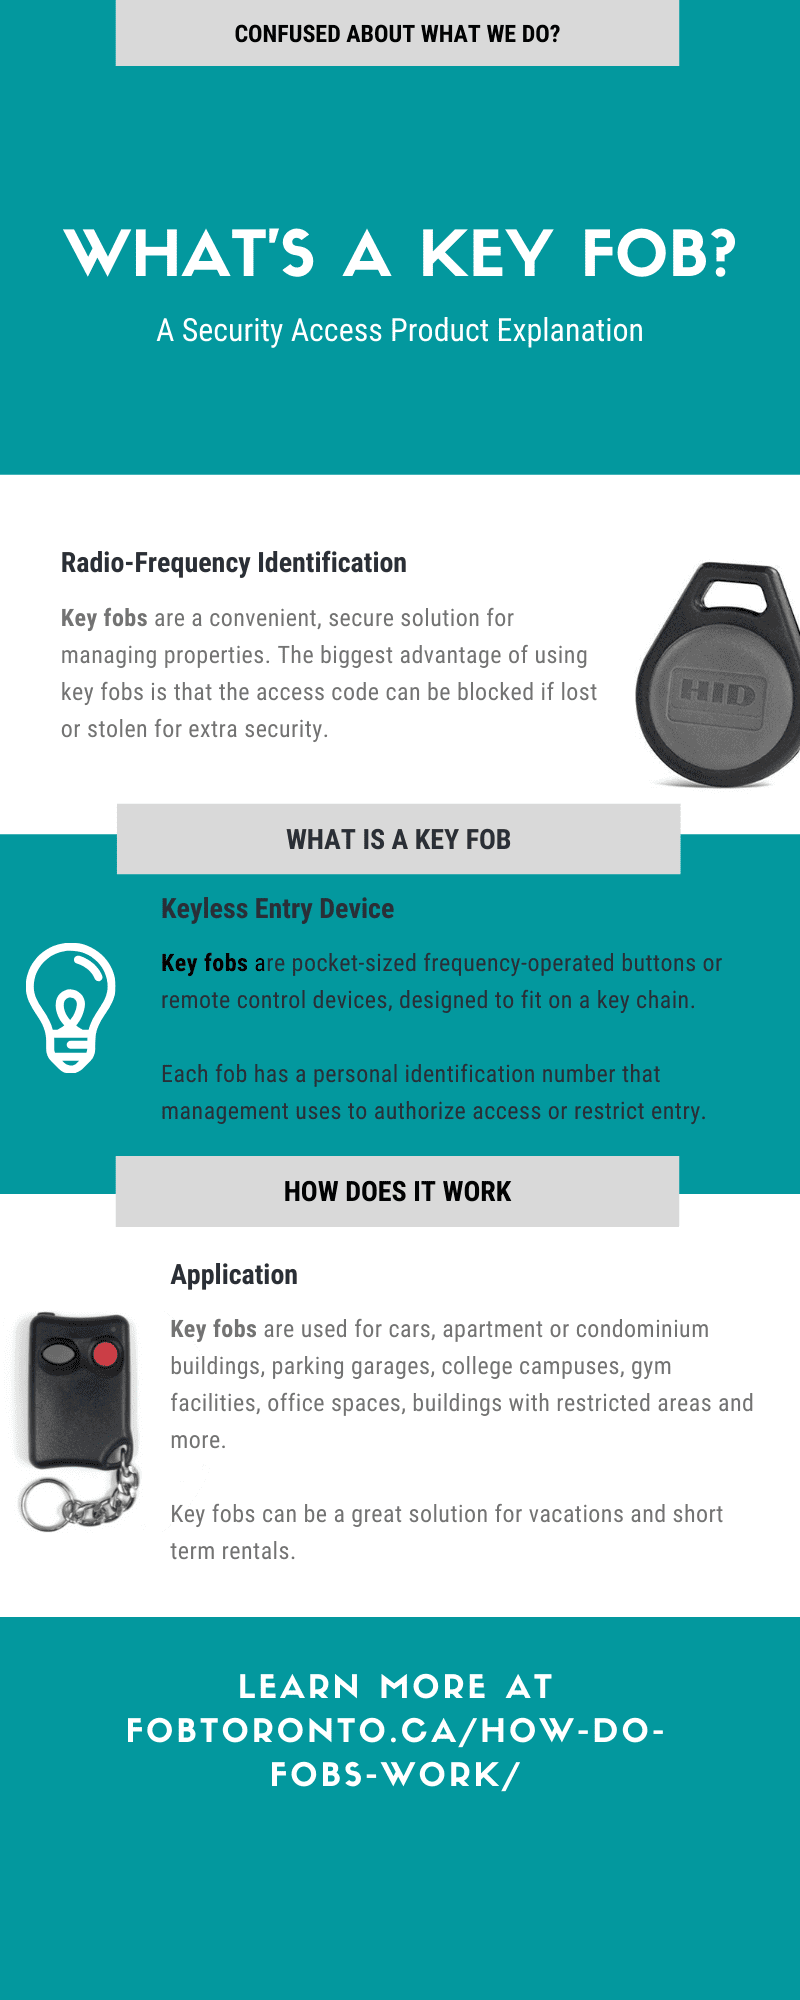 what is a key fob, keyless entry device, whats a fob key